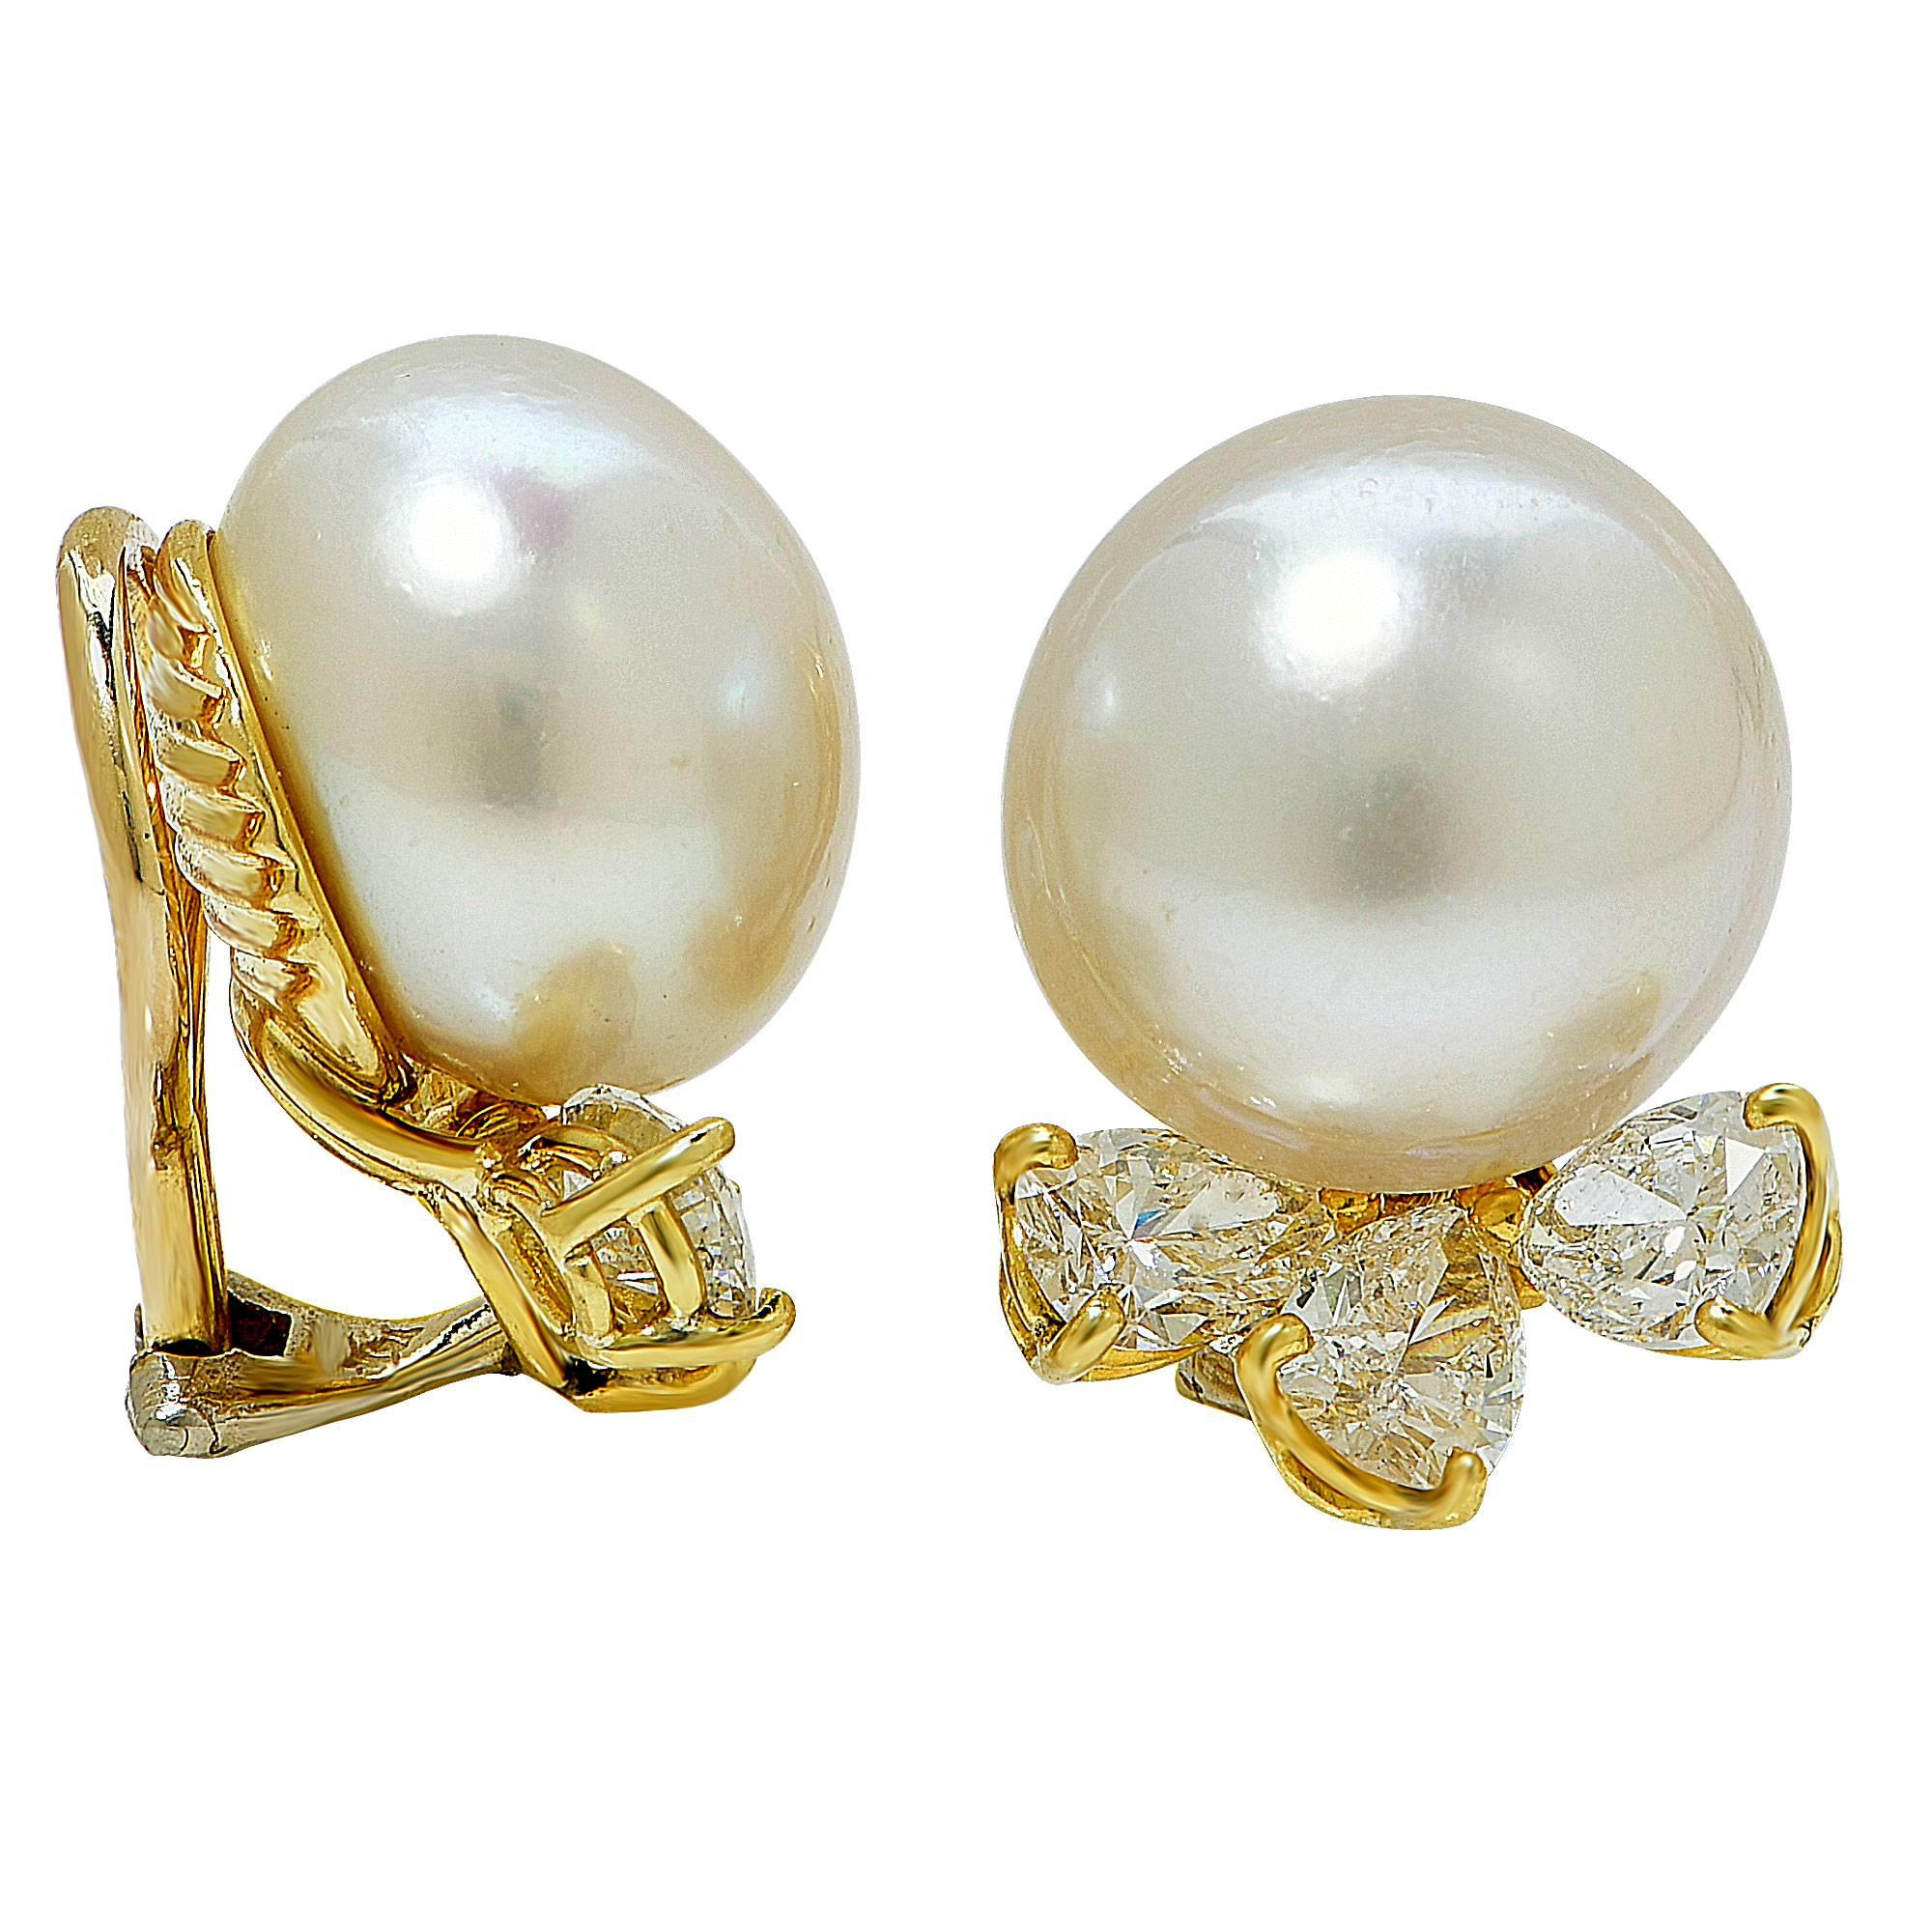 18k yellow gold earrings featuring 2 pearls measuring 13.6mm accented by 6 pear shape diamonds weighing approximately 3cts total, G-H color VS-SI clarity.

The earrings measure .76 inch in height by .61 inch in width by .53 inch in depth.
It is